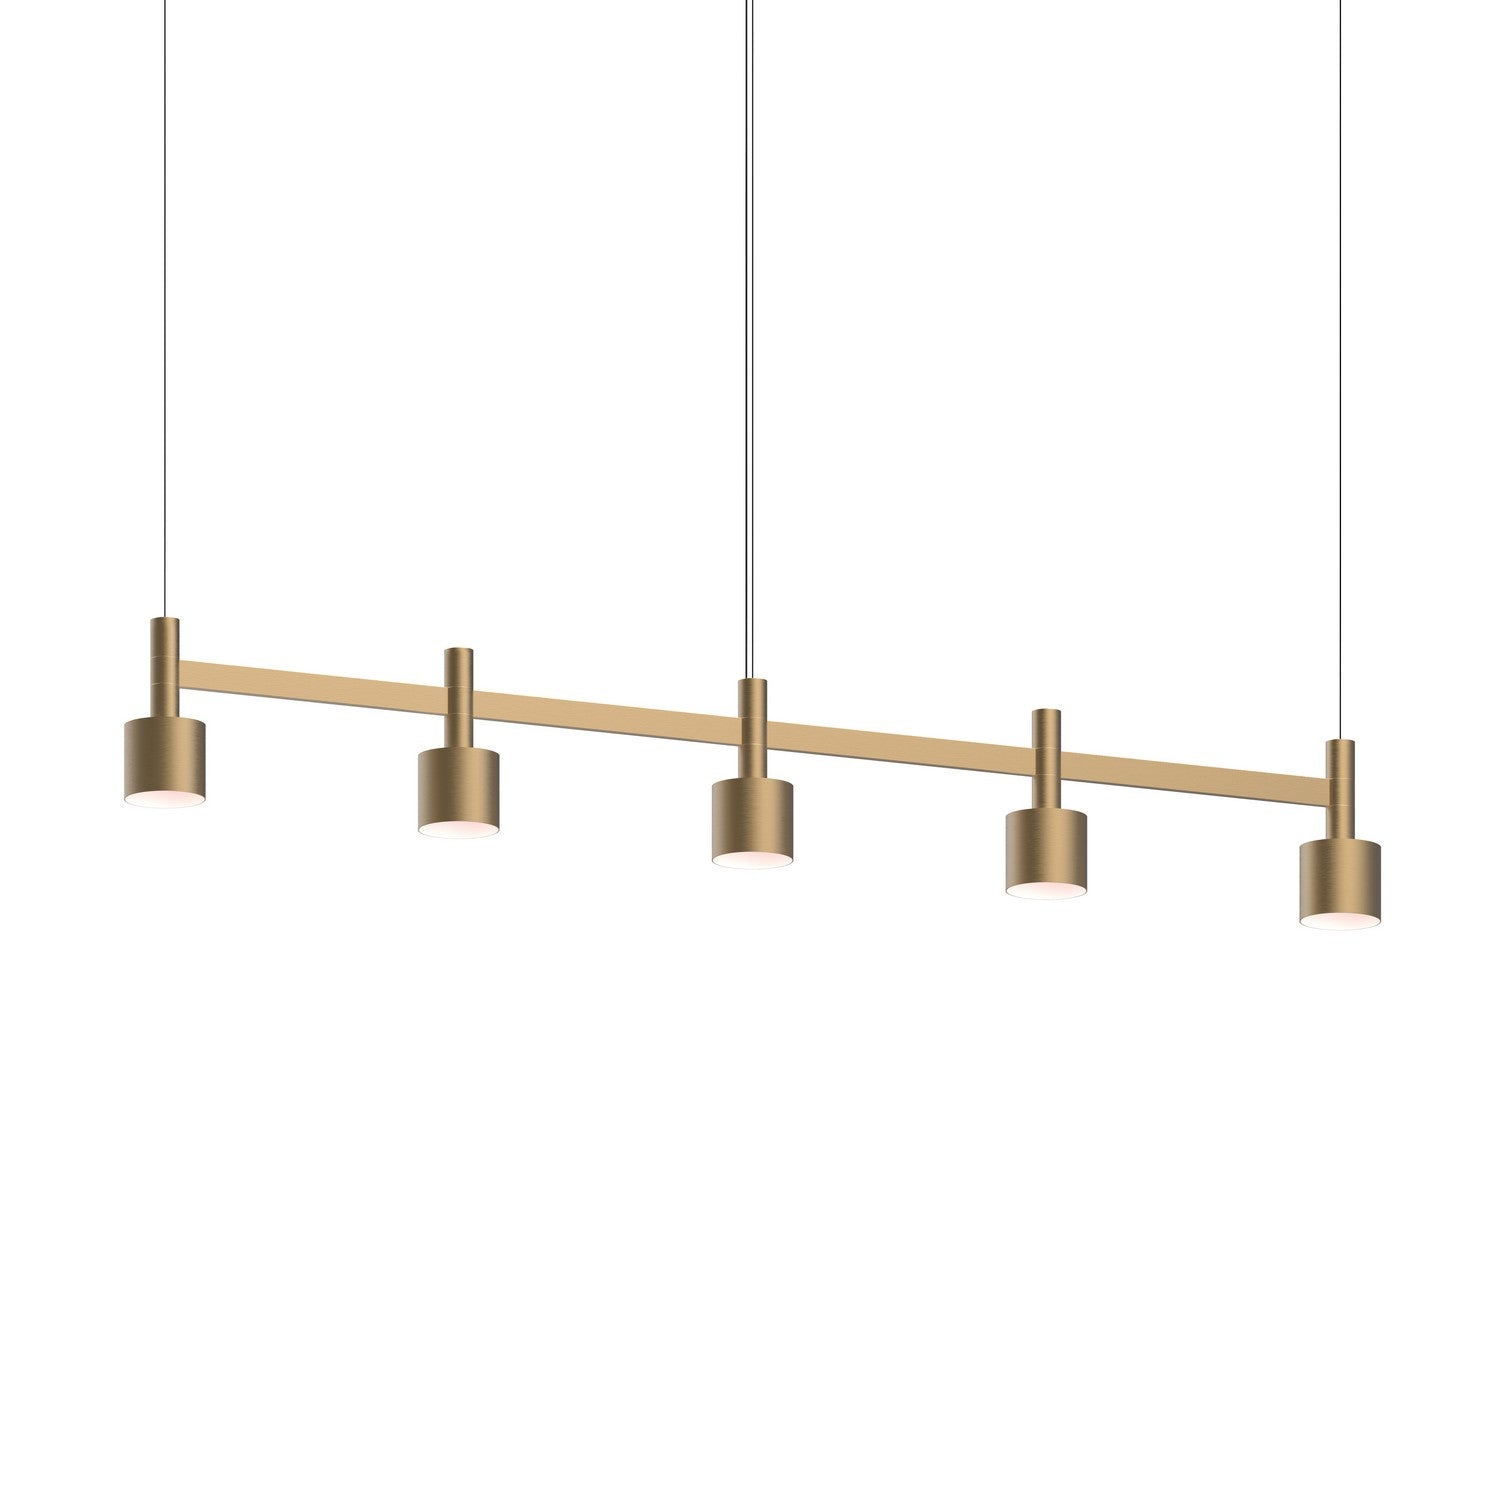 Sonneman - 1785.14-CYL - LED Linear Pendant - Systema Staccato - Brass Finish